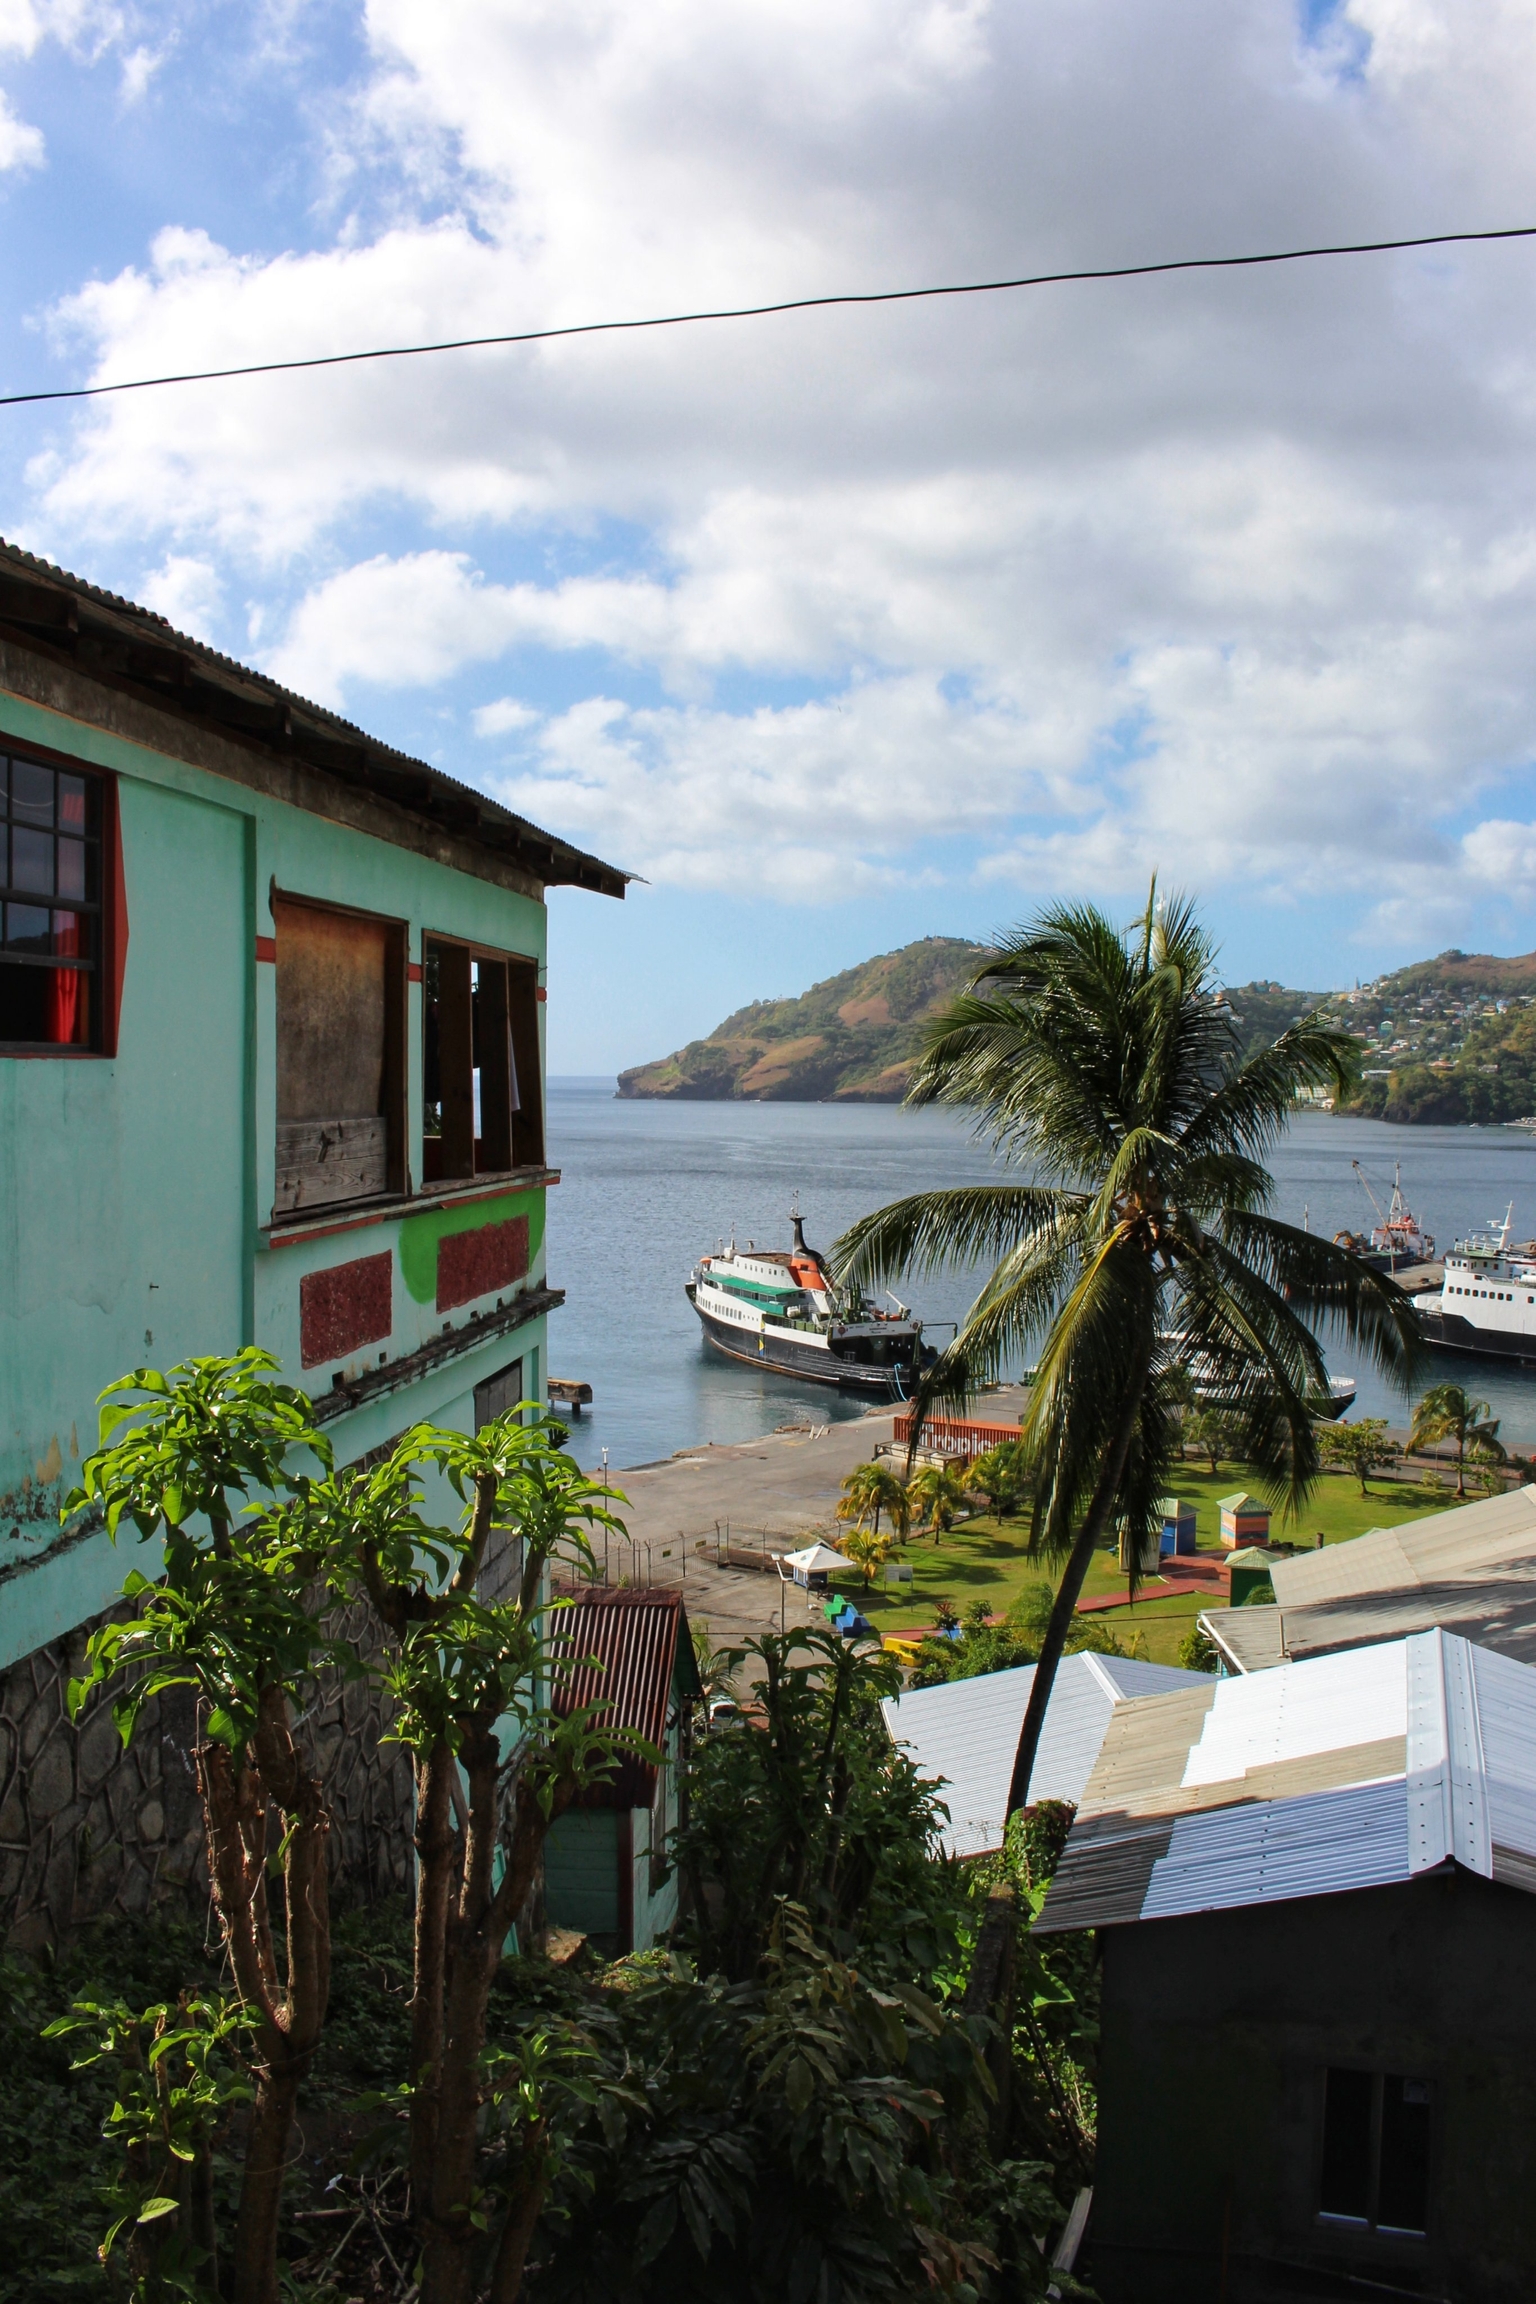 A typical Caribbean picture showing a colorful house on the left, palm tree on the right with the sea, a ship and the rest of the harbor clearly visible in the background.